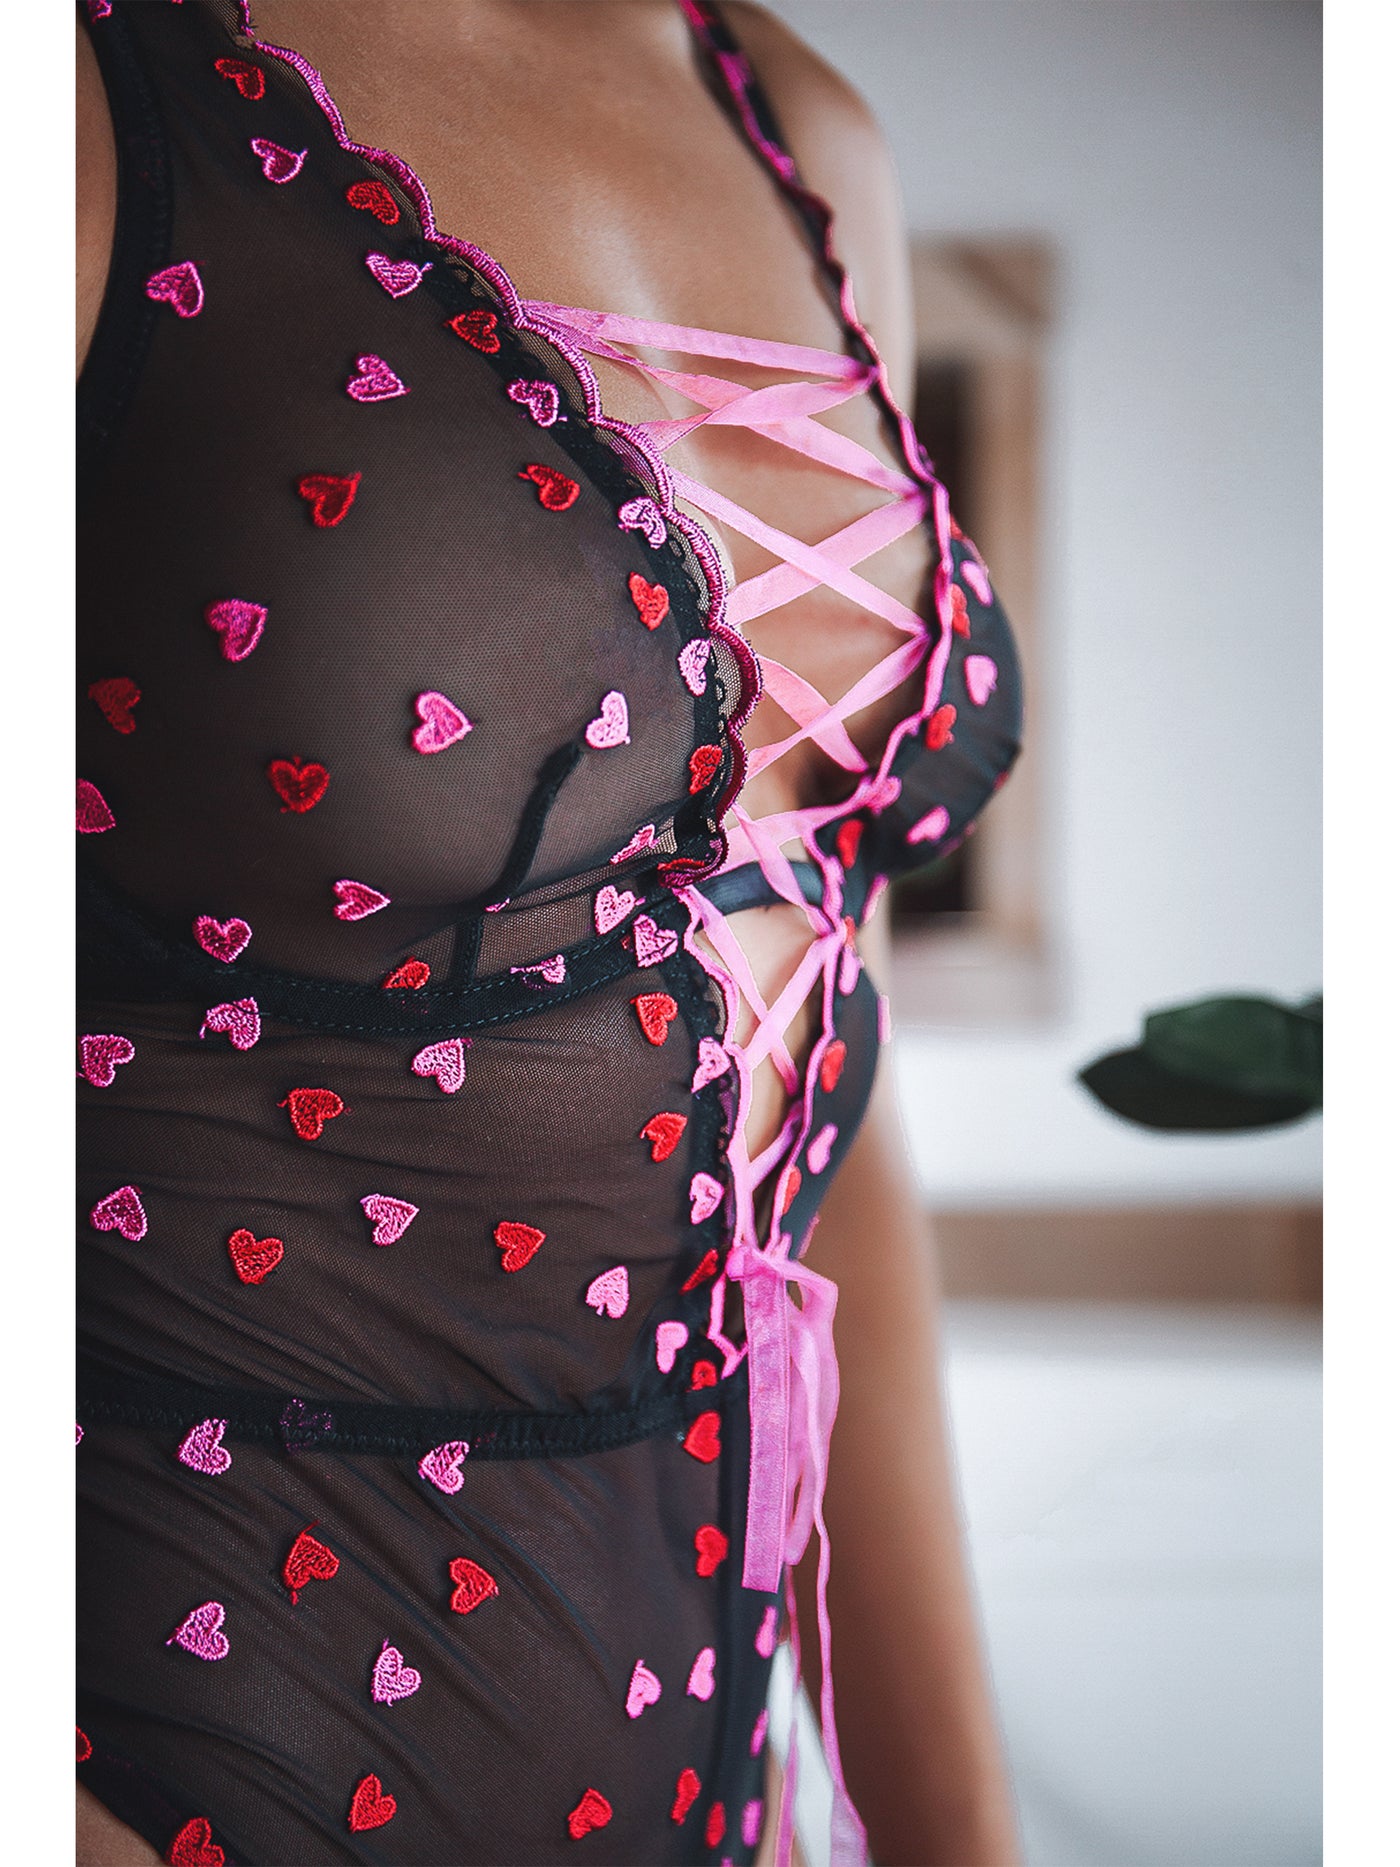 Pretty Love Pink and Red Heart Embroidery Stretch Mesh Bodysuit - Costumes & Lingerie Australia